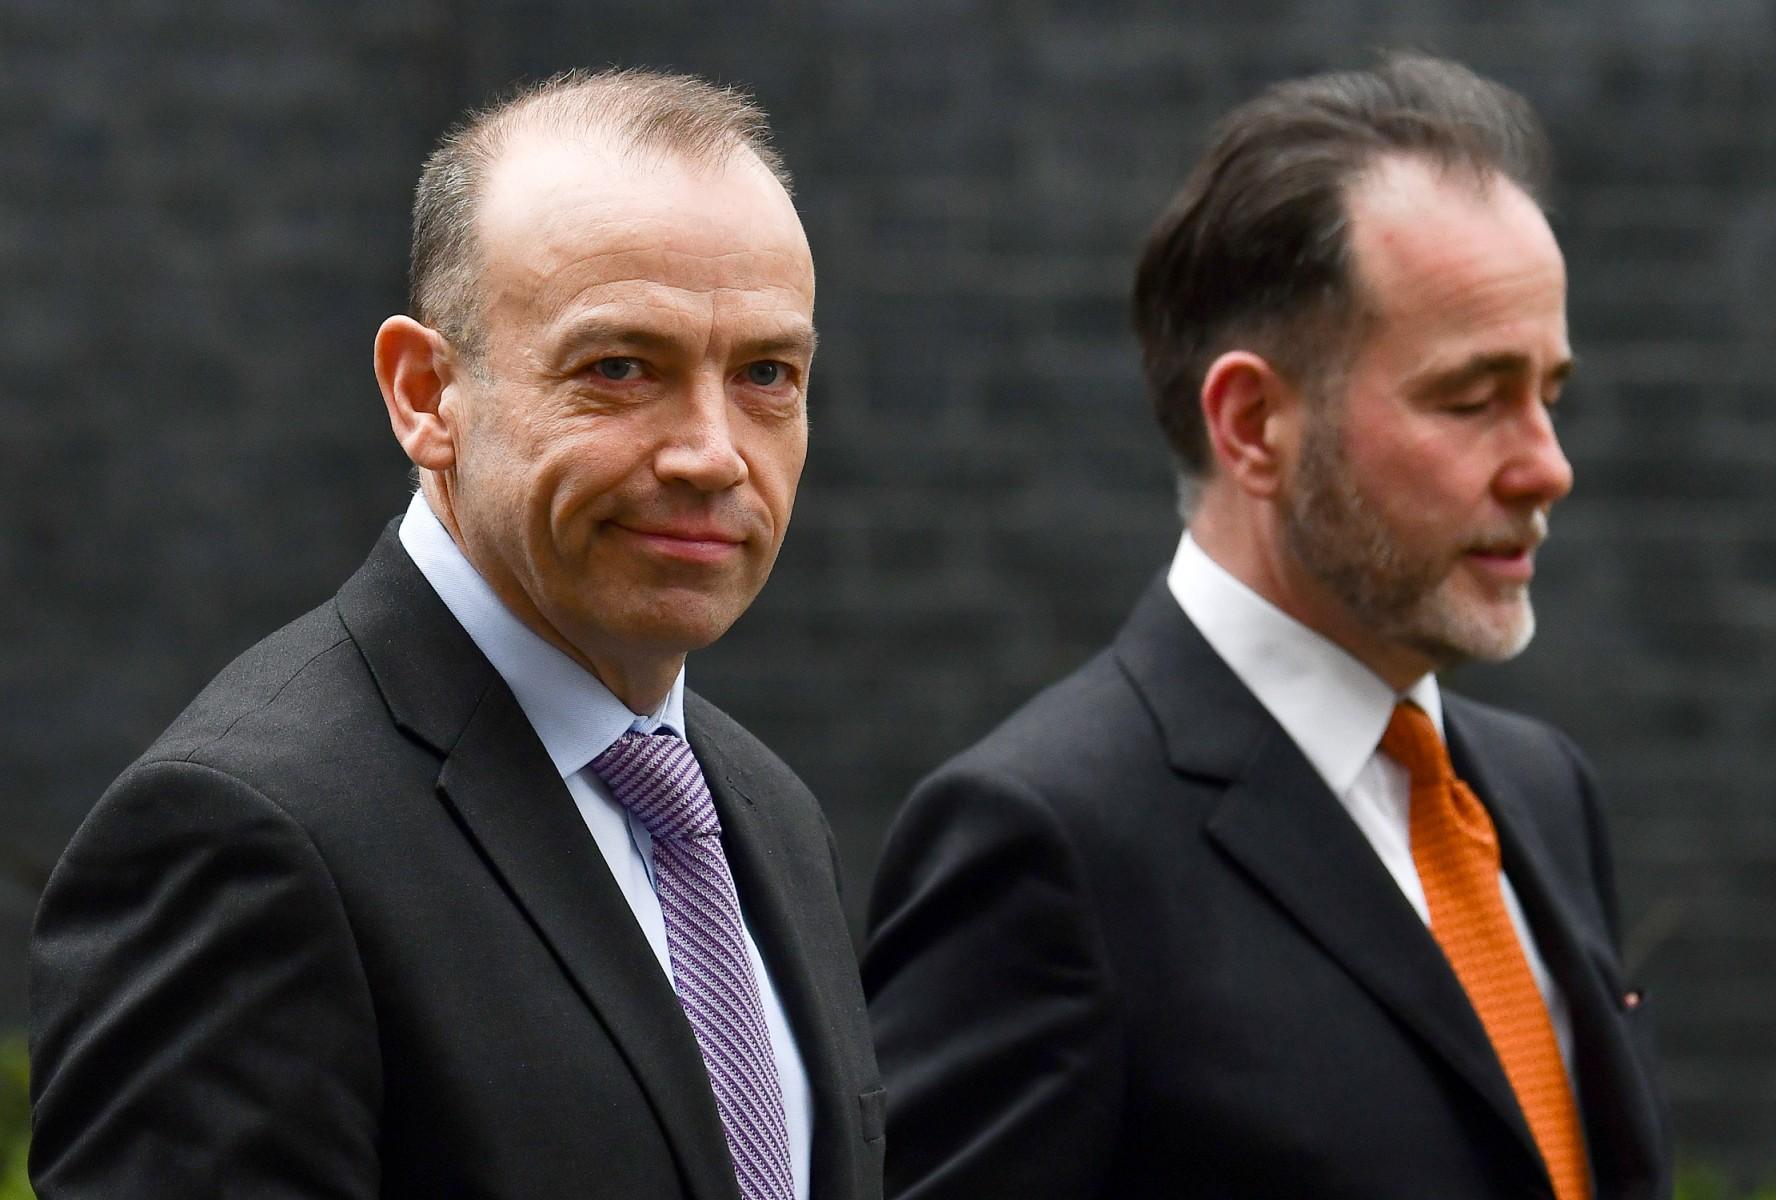 Britain's Chief Whip Chris Heaton-Harris (L) and Christopher Pincher, Minister of State for Housing, leave from 10 Downing Street in London on Feb 8. Photo: AFP